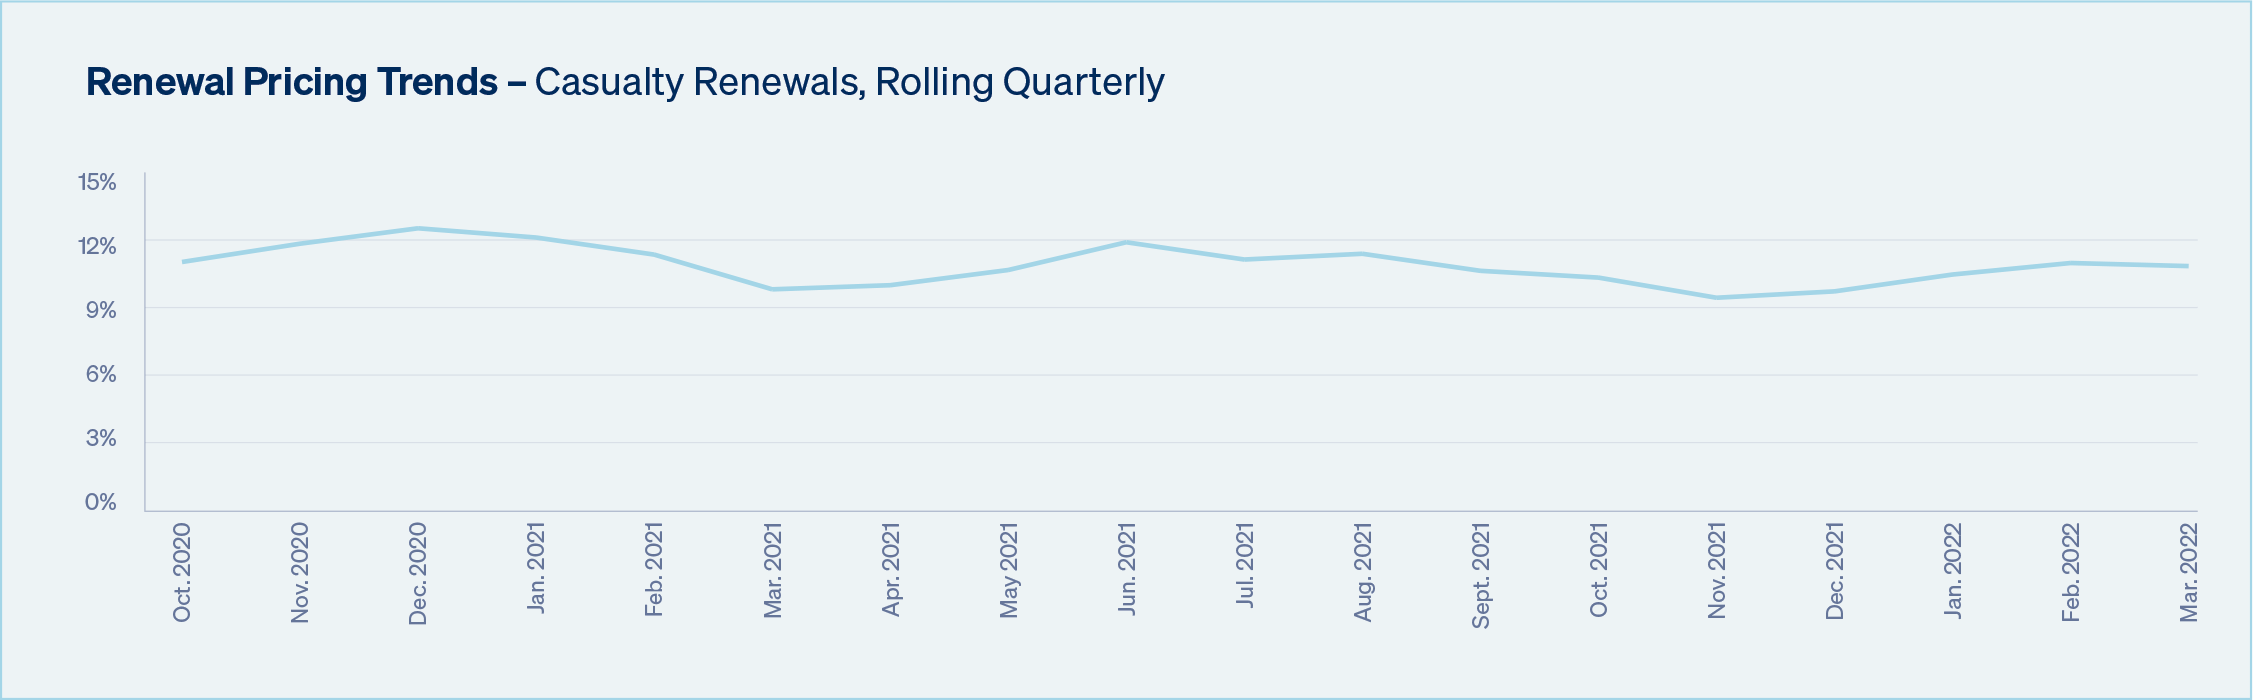 Casualty Renewal Trends Oct. 2020 to Mar. 2022